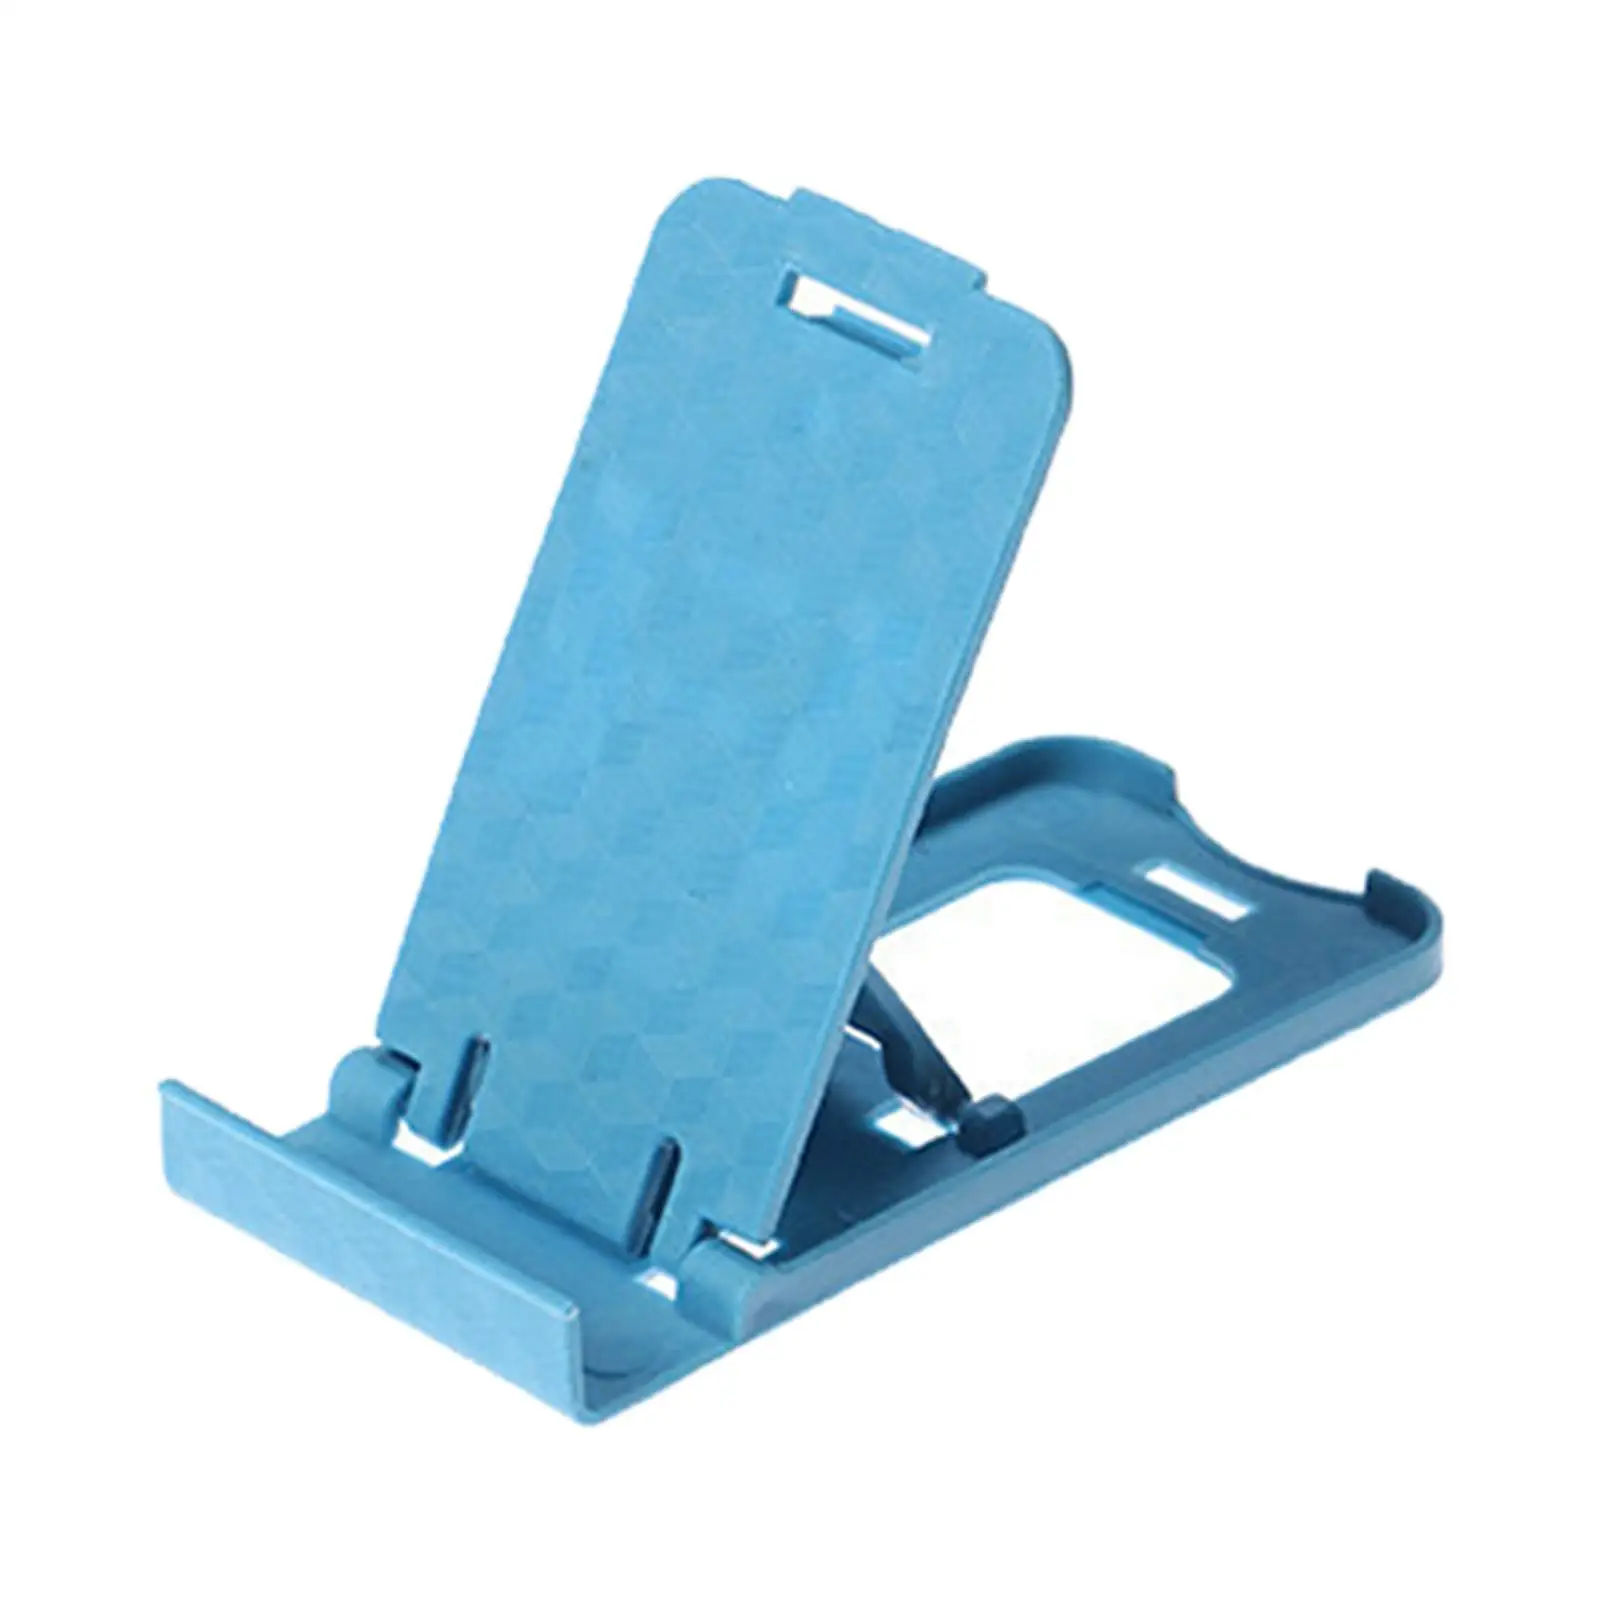 Mini Chair Shape Cell Phone Stand Convenient Multi Angle Cradle Multi Functions Beach Chair Shape Stand Stents for Tablet Desk